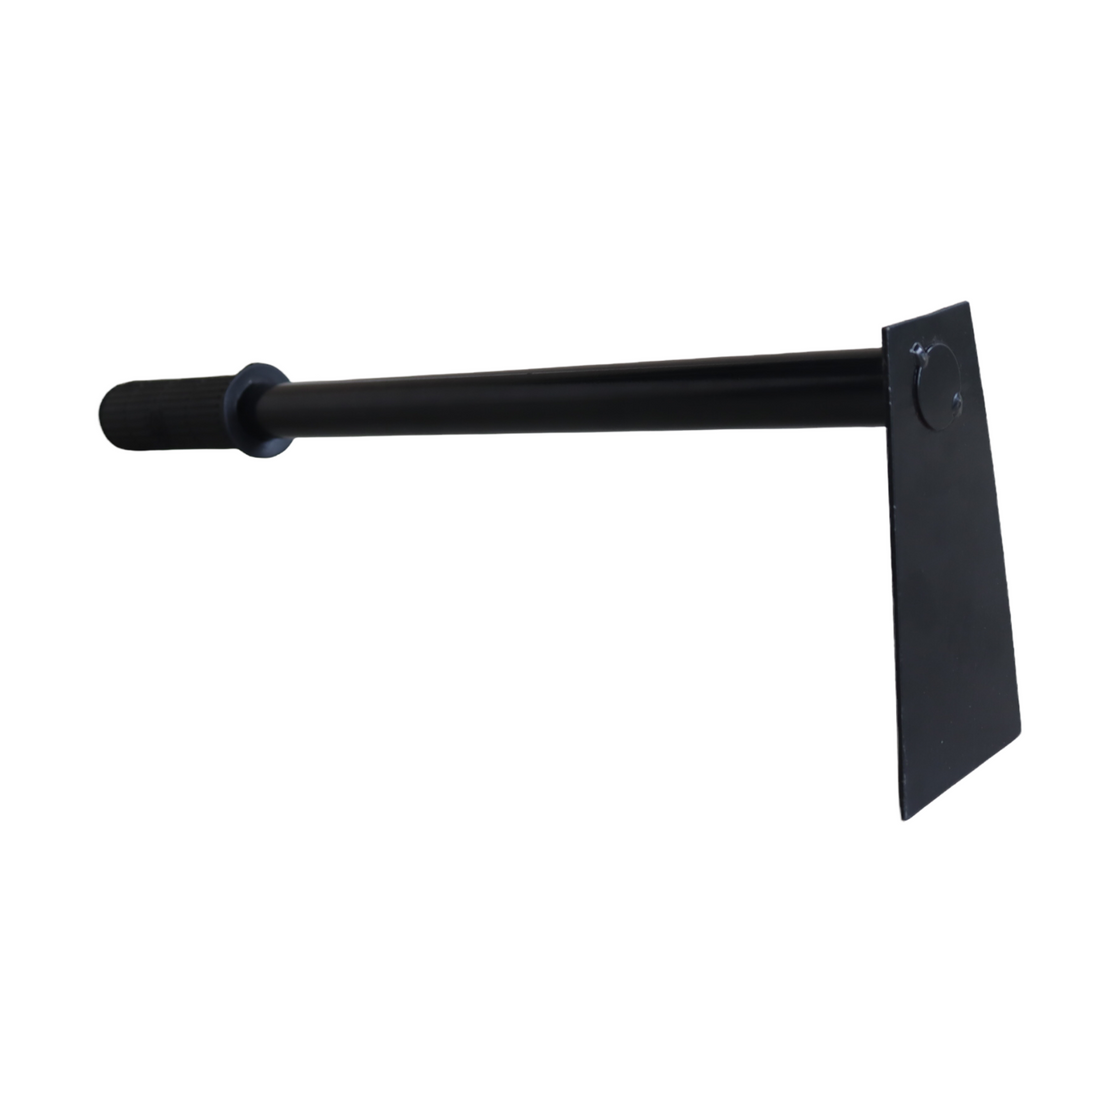 Gardening Hoe - Small (18.5 Inches)